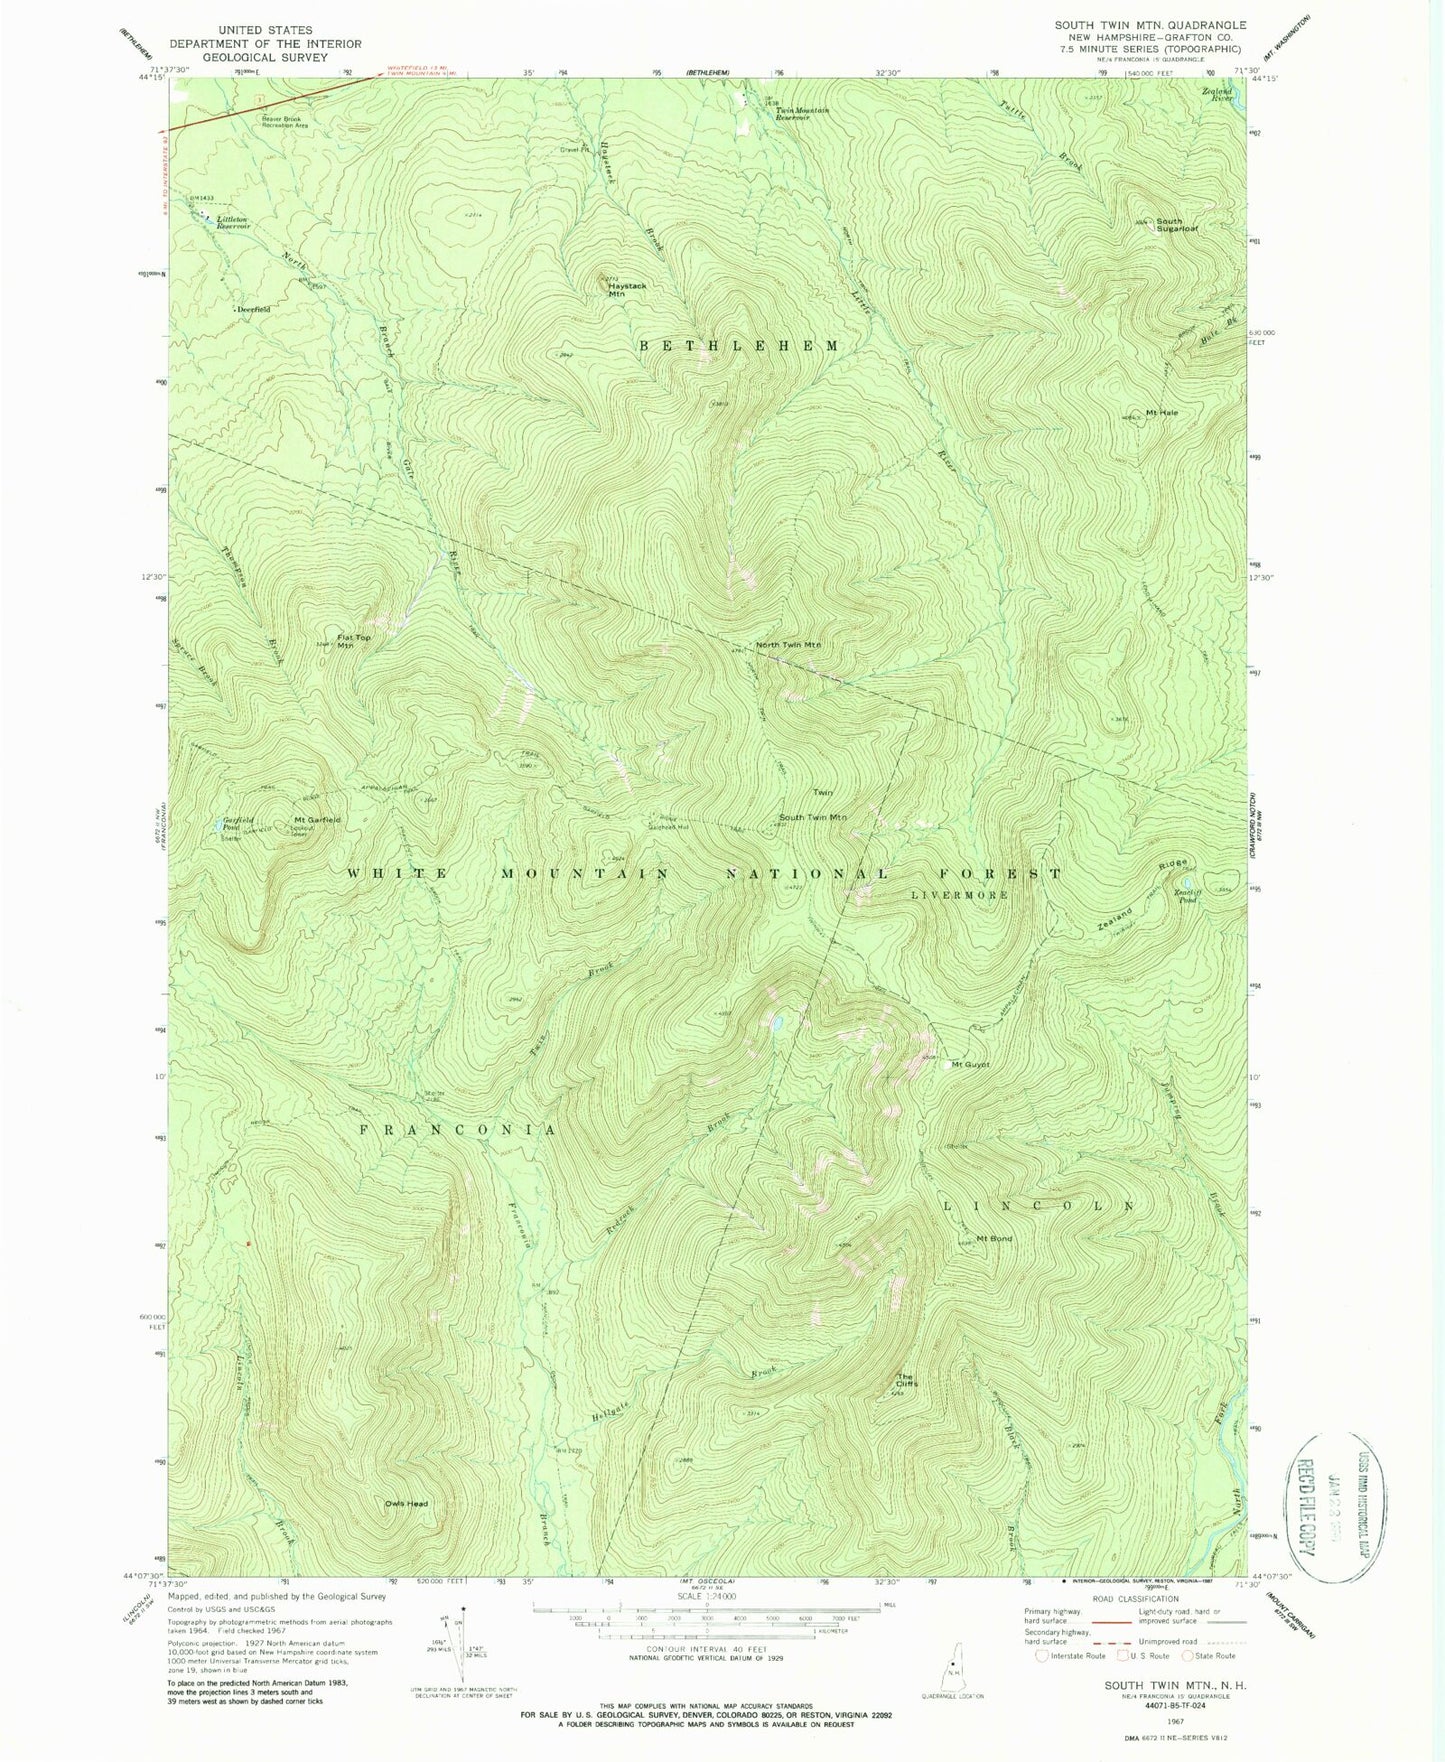 USGS Classic South Twin Mountain New Hampshire 7.5'x7.5' Topo Map Image